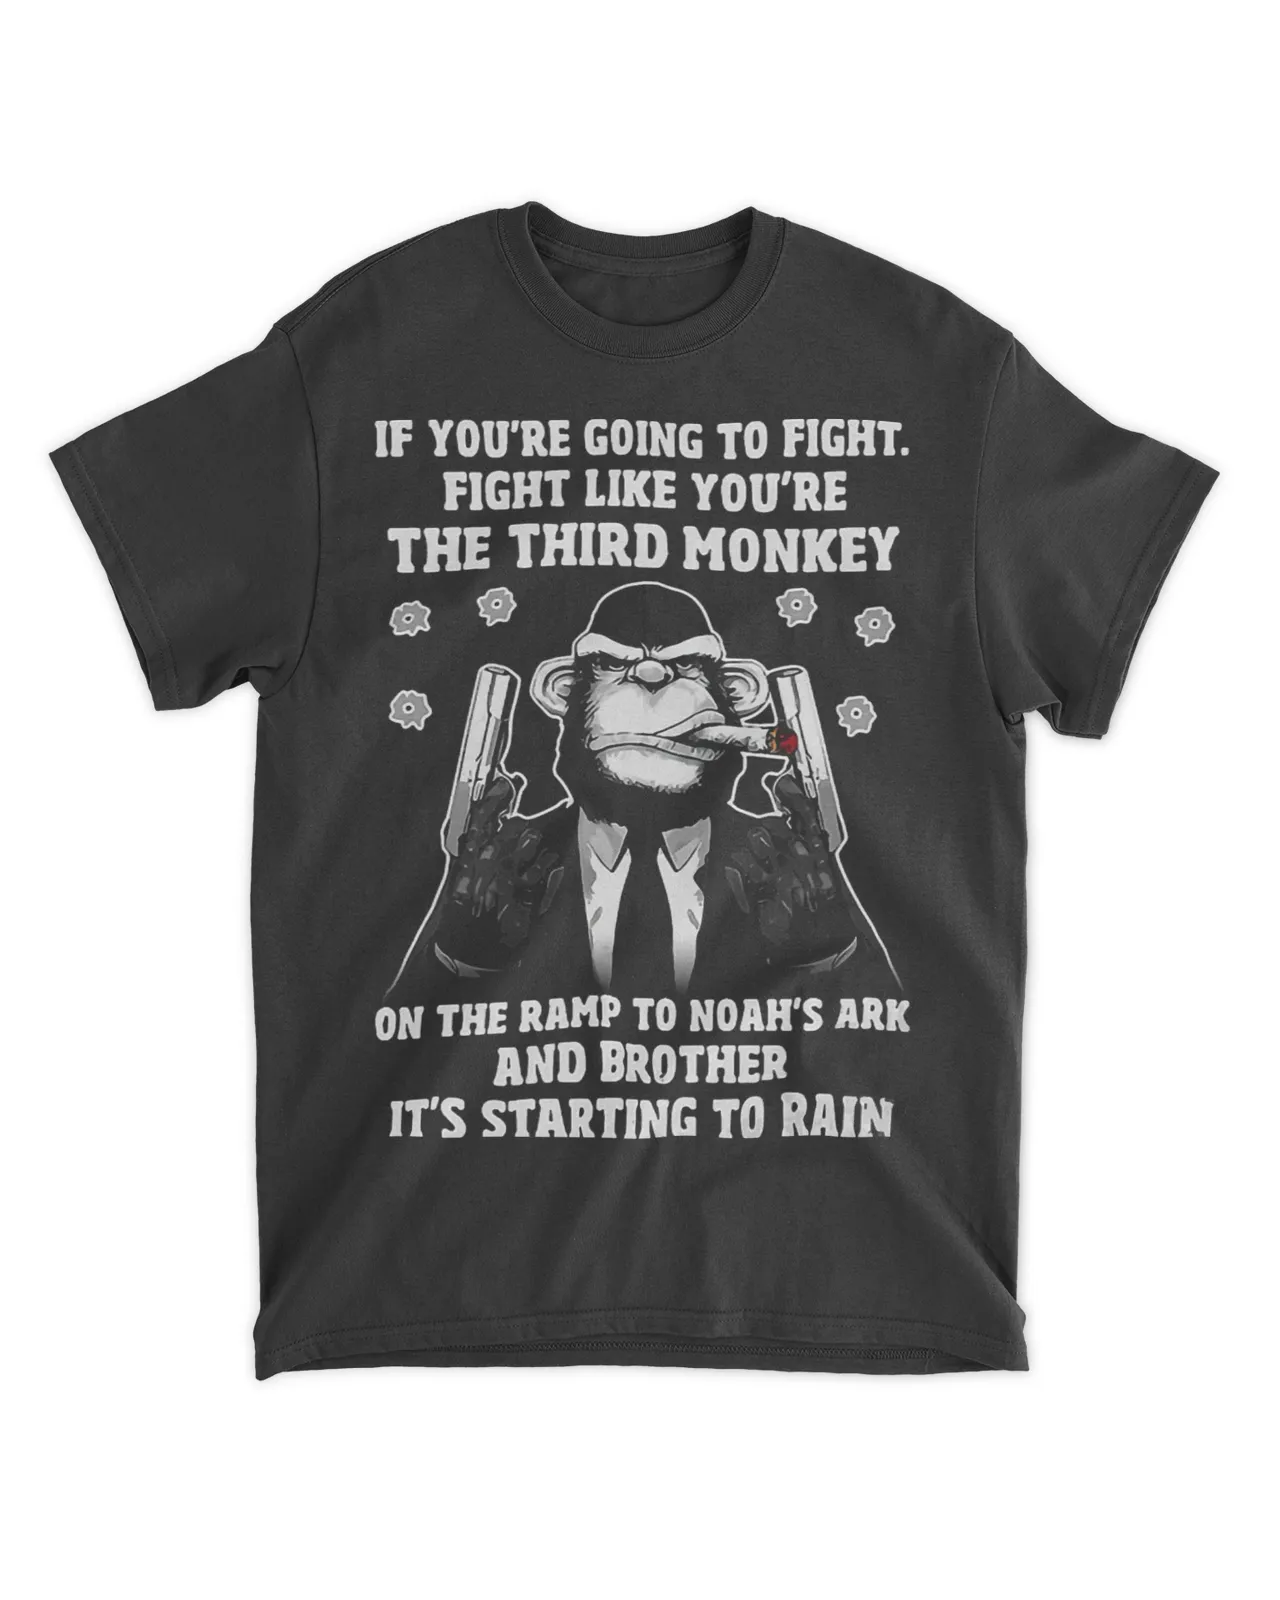  If you're going to fight fight like the third monkey pn the ramp to noahs ark and brother it's starting to rain shirt